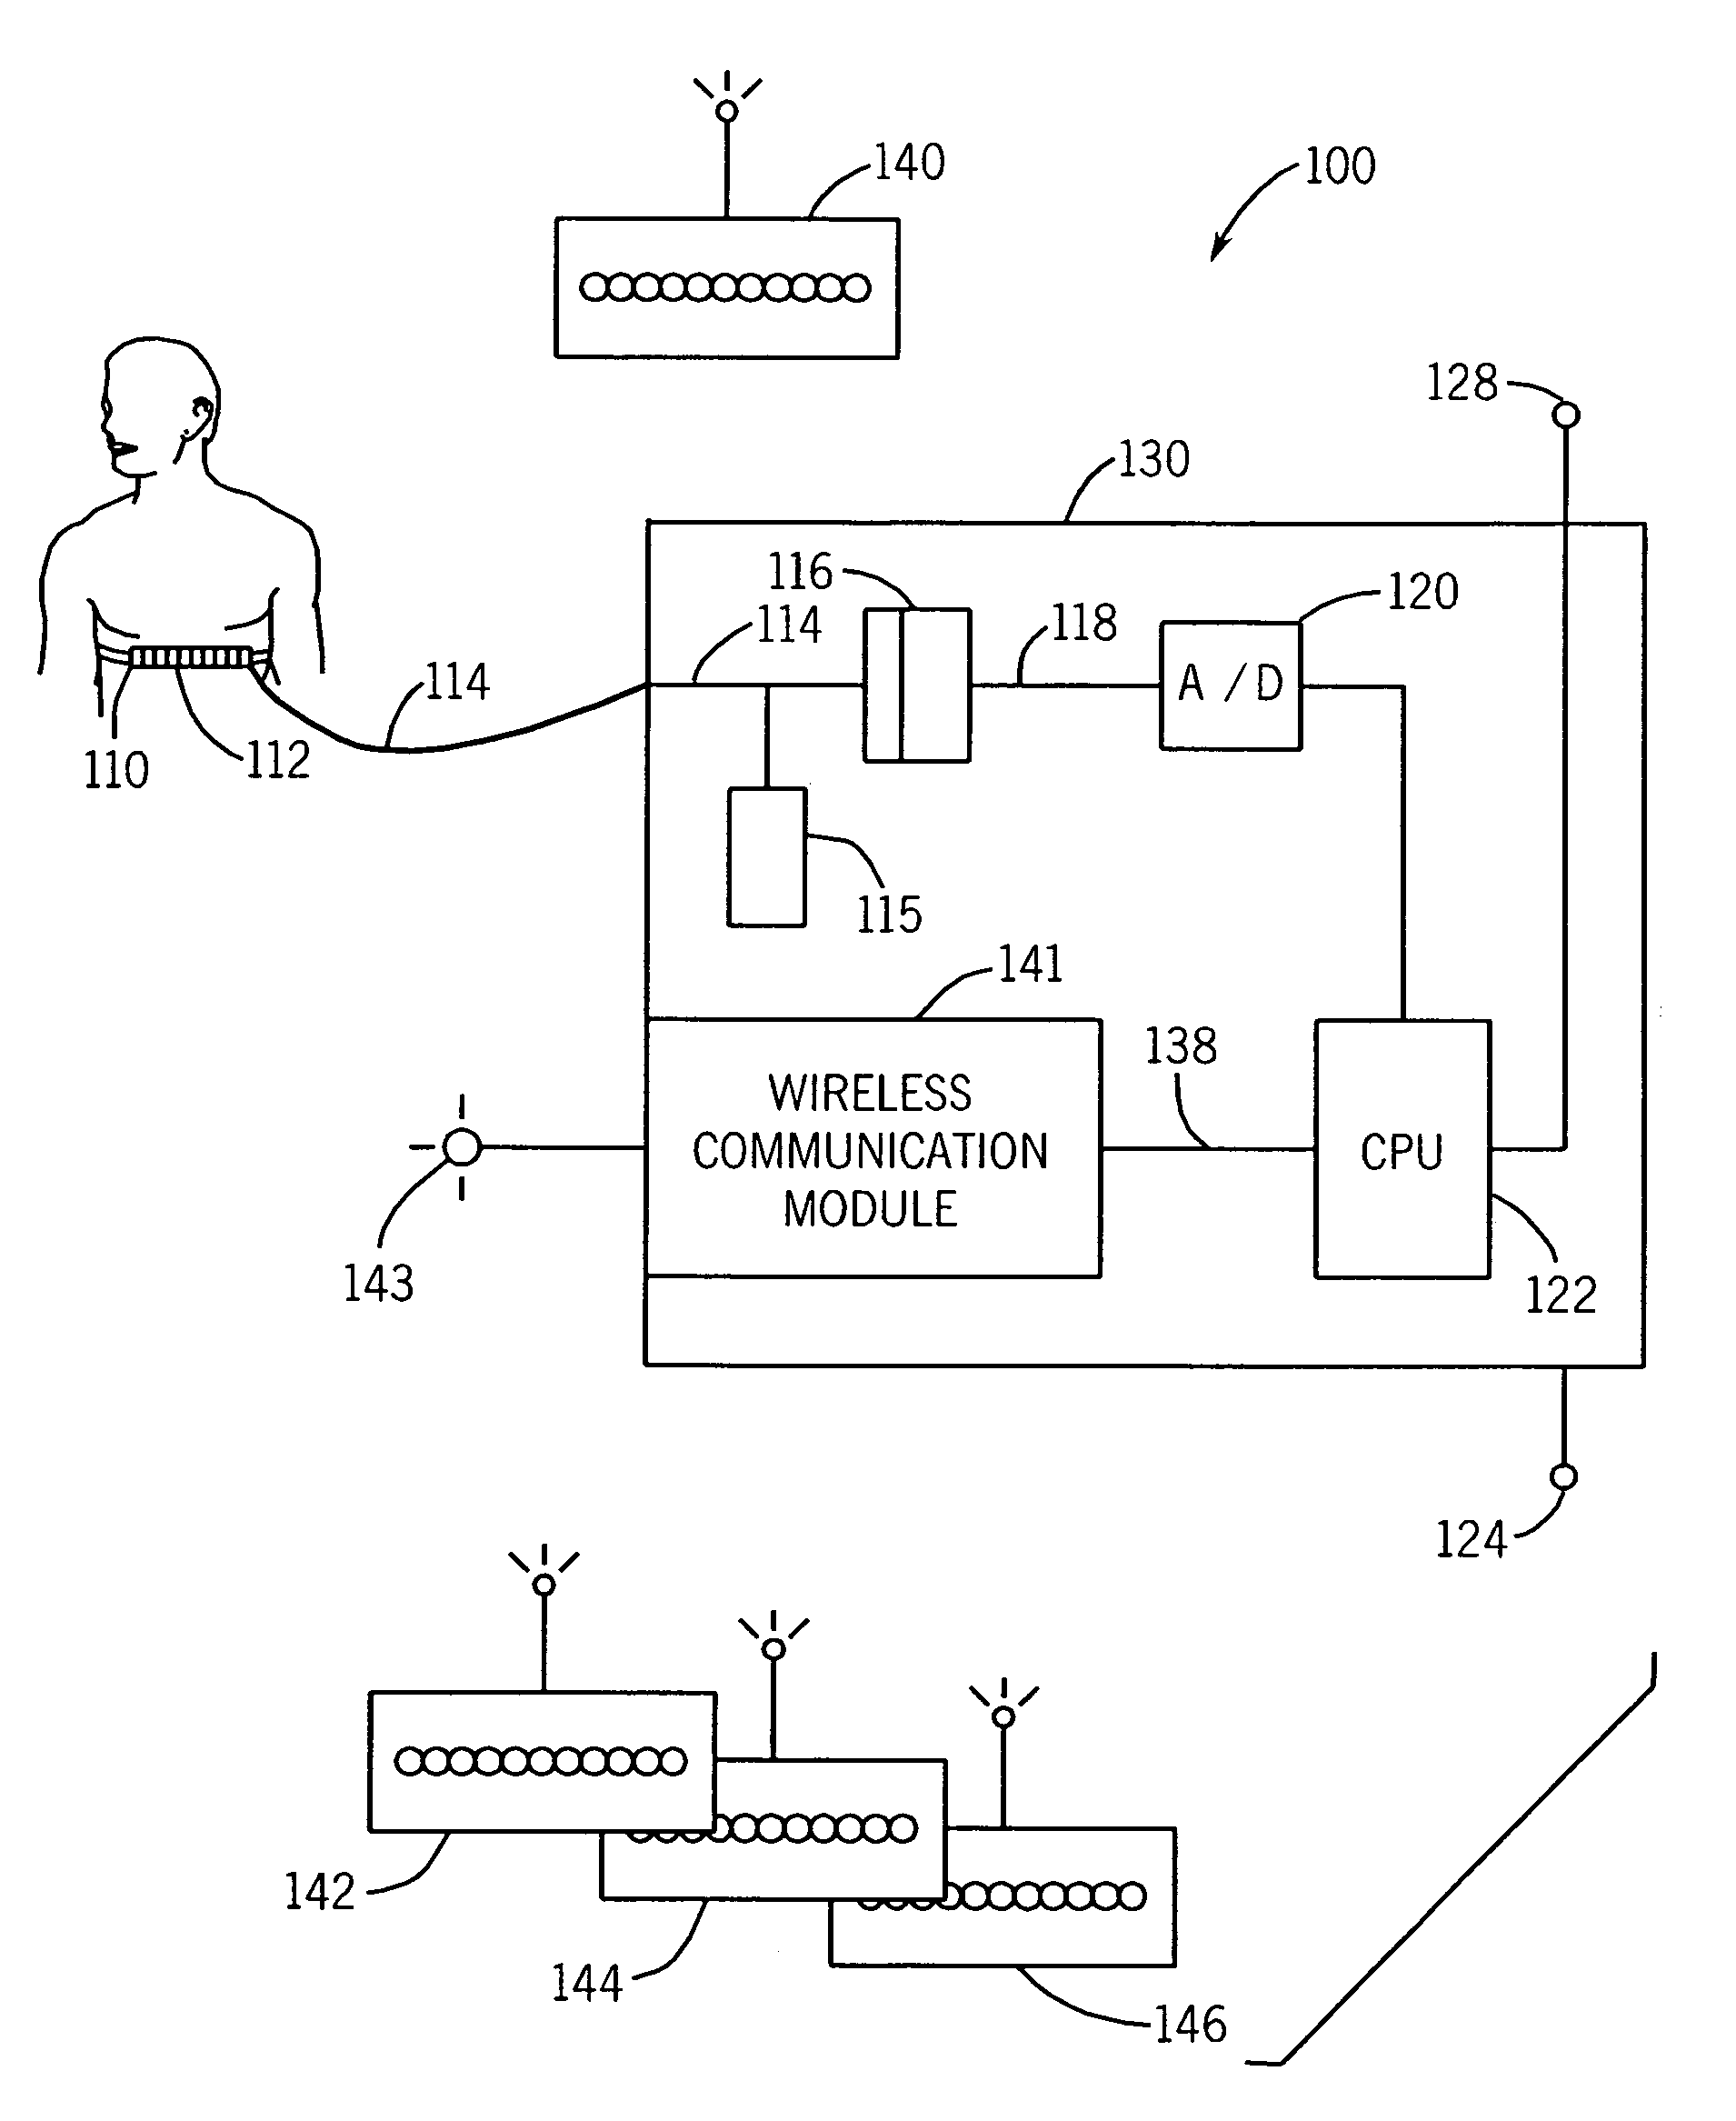 Motion monitor system for use with imaging systems